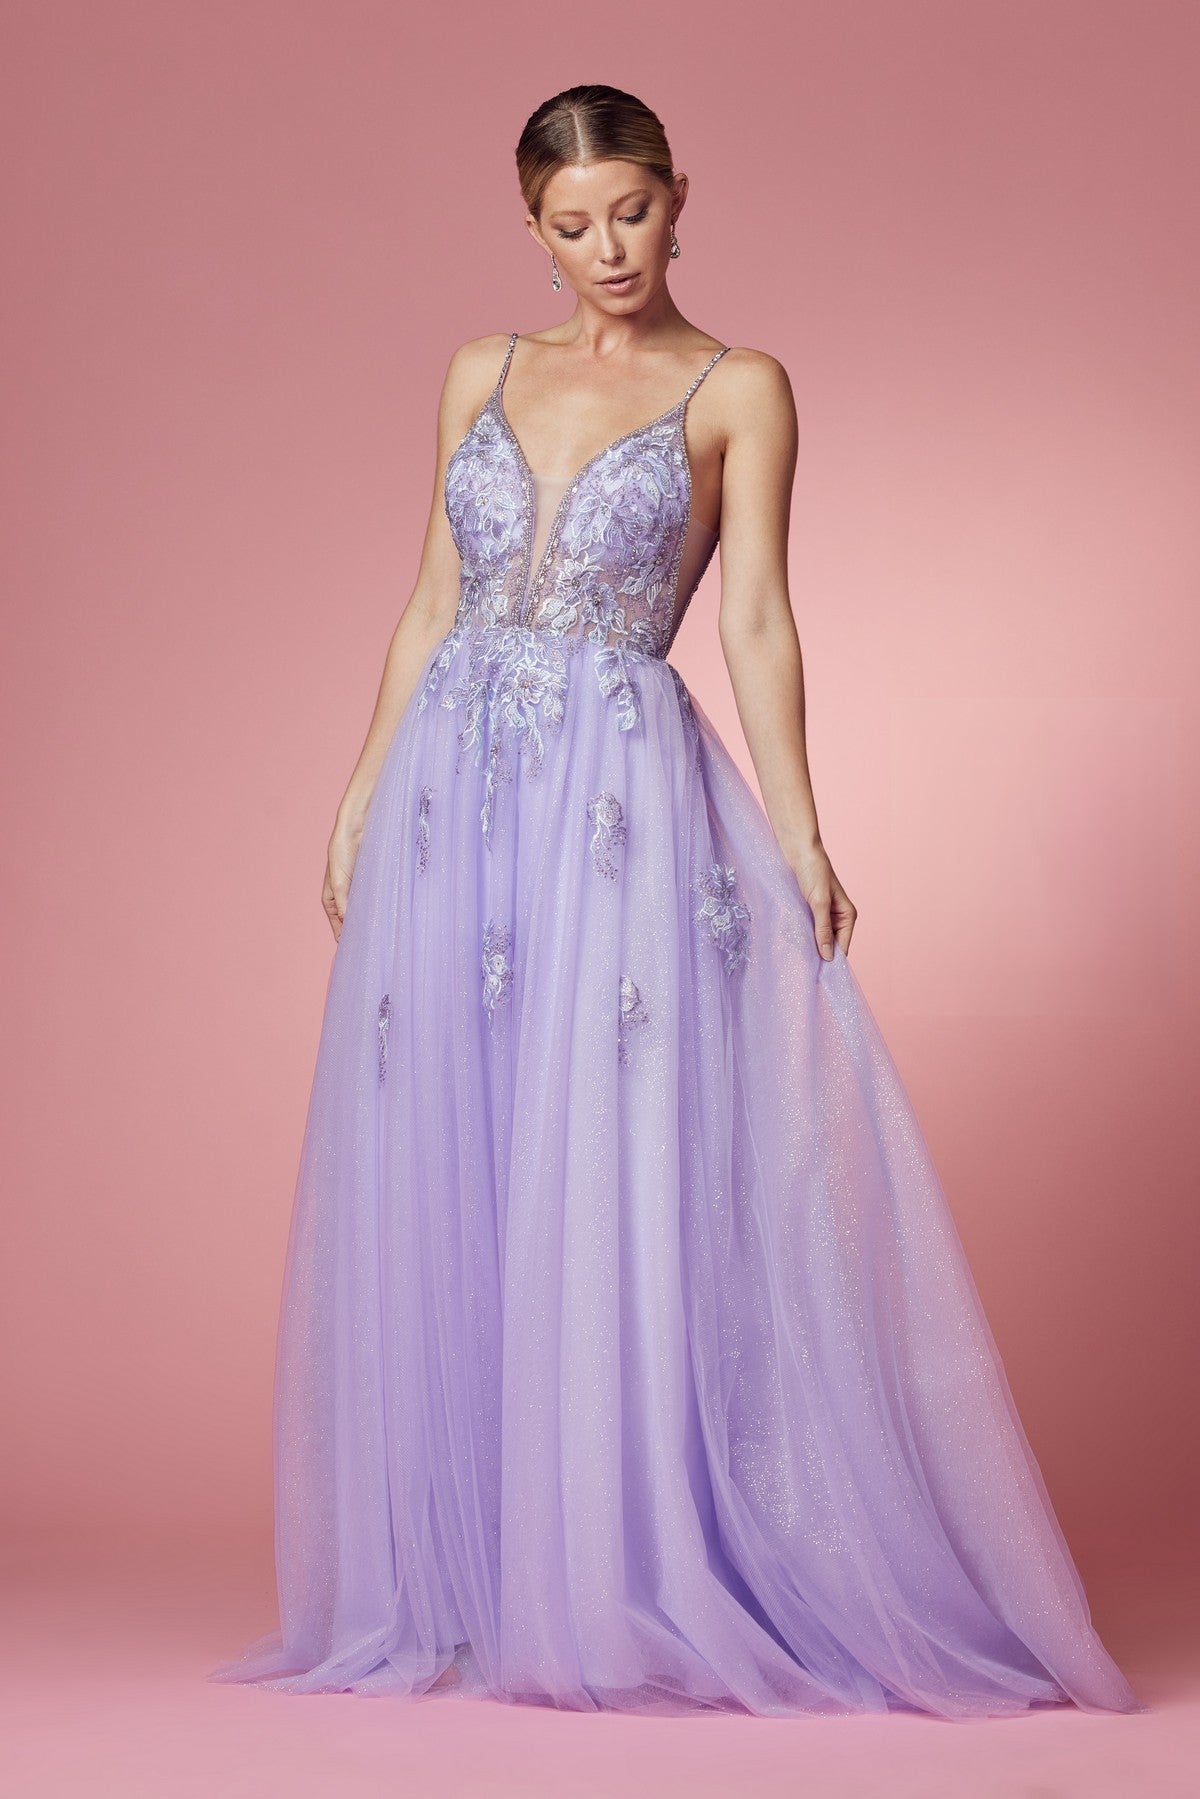 Embroidered Beads Open Sides Tulle Skirt Long Prom Dress NXT1012-Prom Dress-smcfashion.com